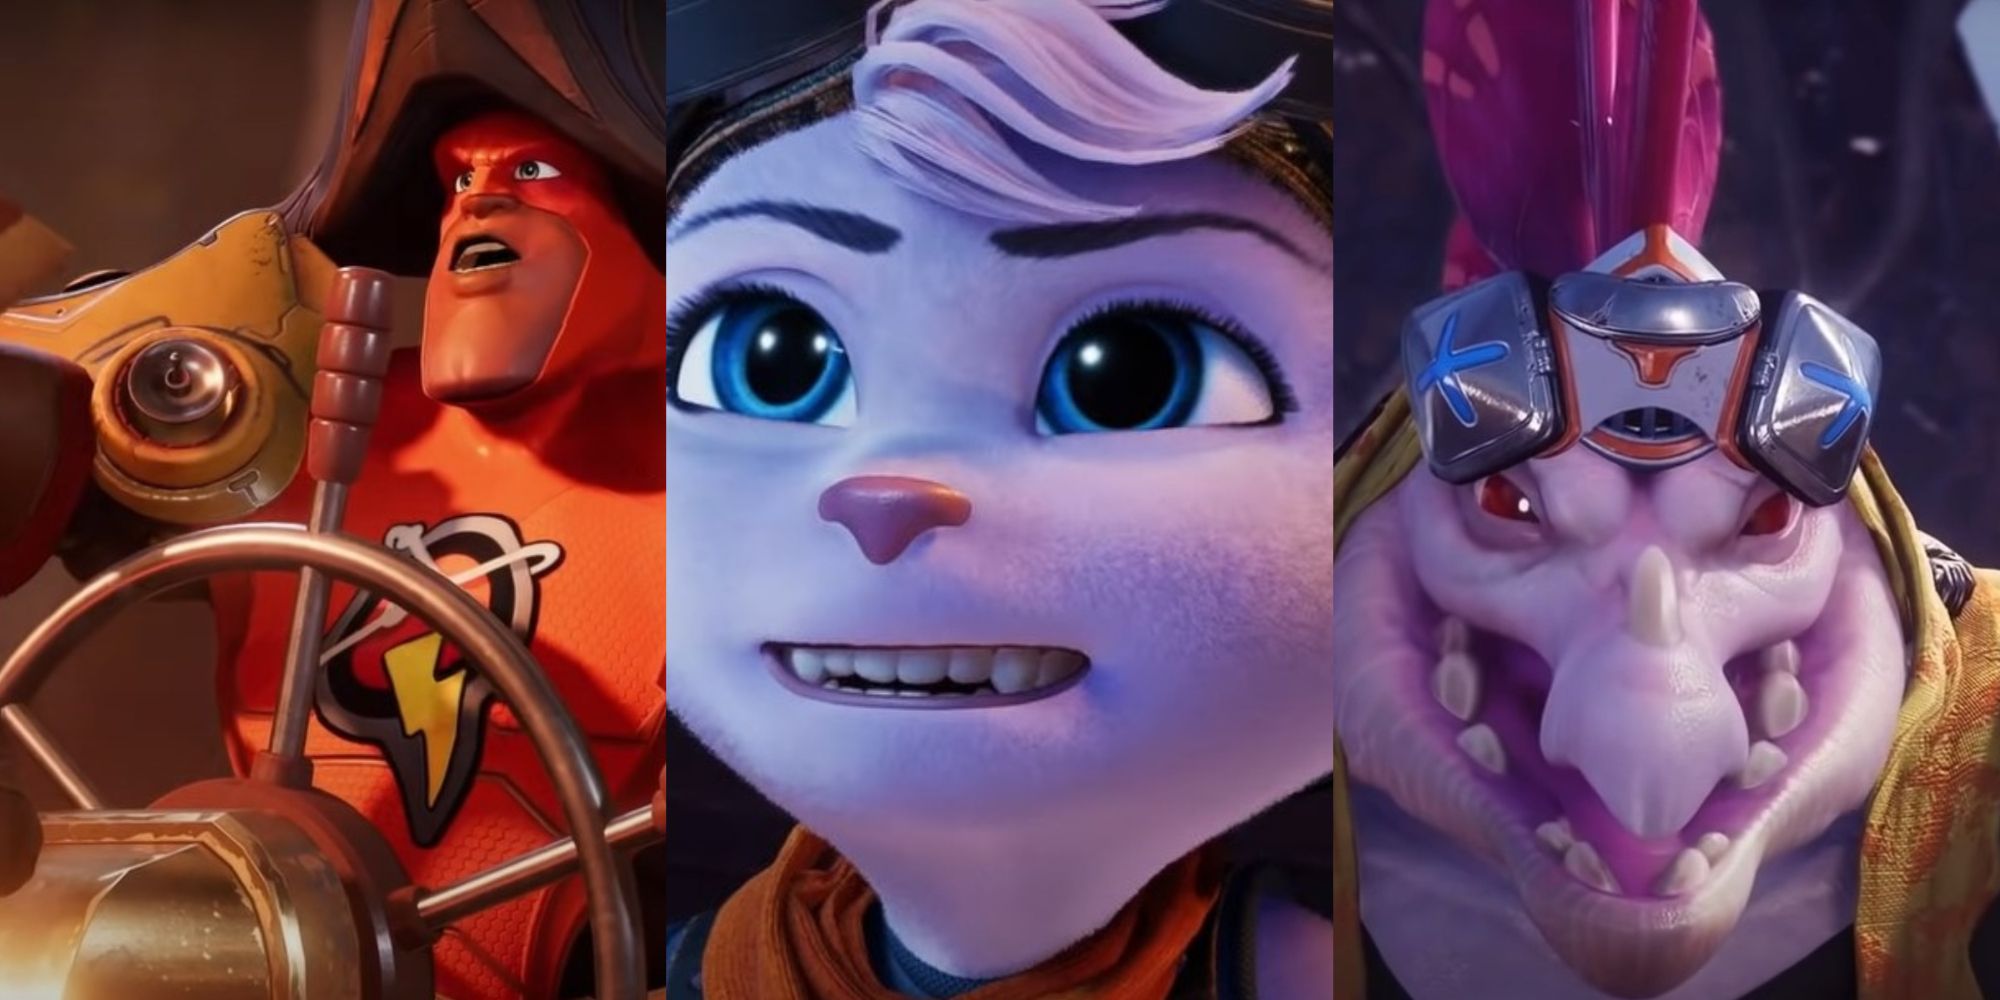 Quantum, Rivet, and Monk Scholar split image from ratchet and clank rift apart